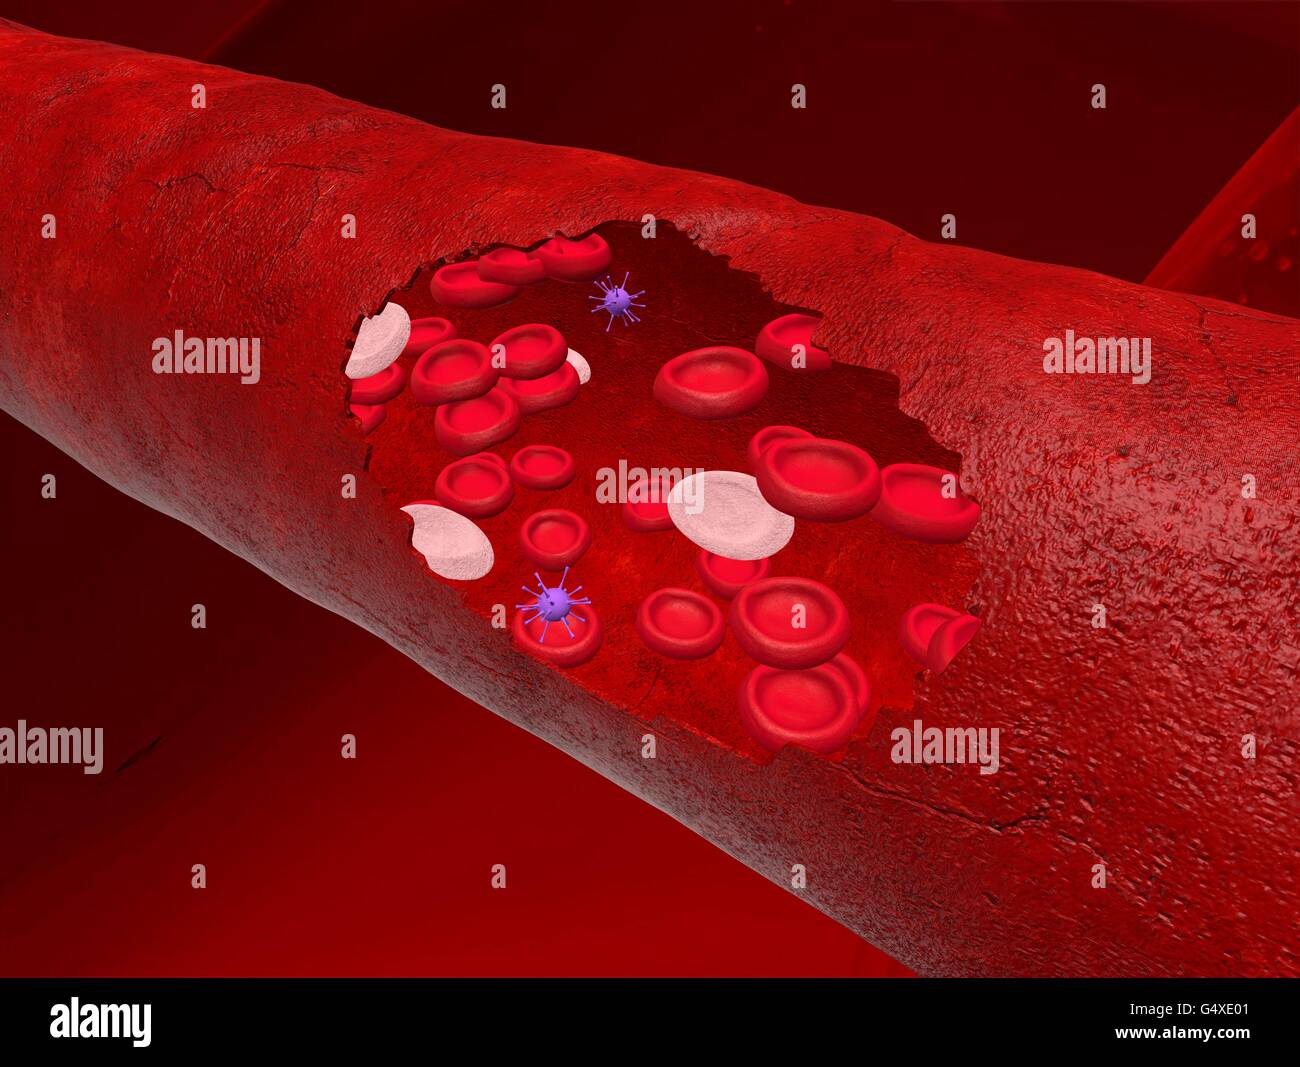 Blood vessel with bloodcells flowing through Stock Photo